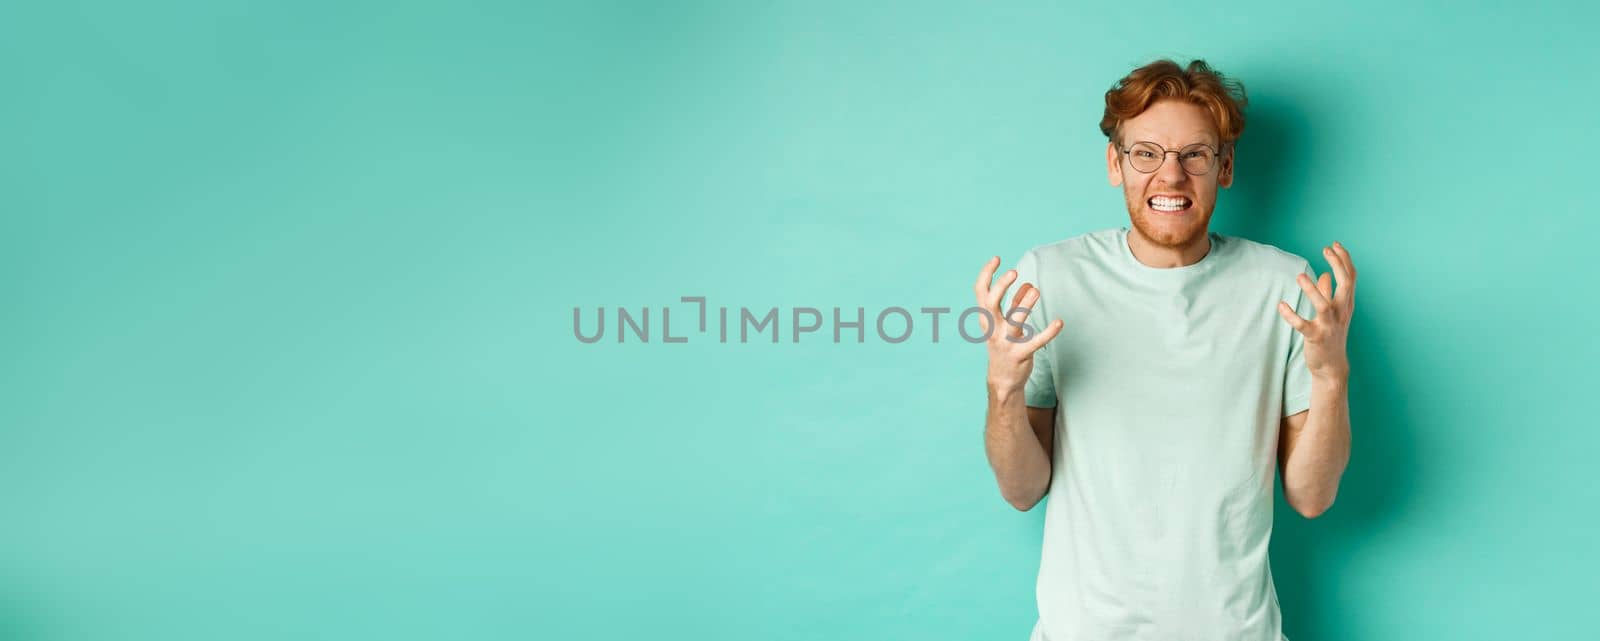 Portrait of distressed and angry redhead guy losing temper, shouting and shaking hands outraged, staring with furious face at camera, standing over mint background.